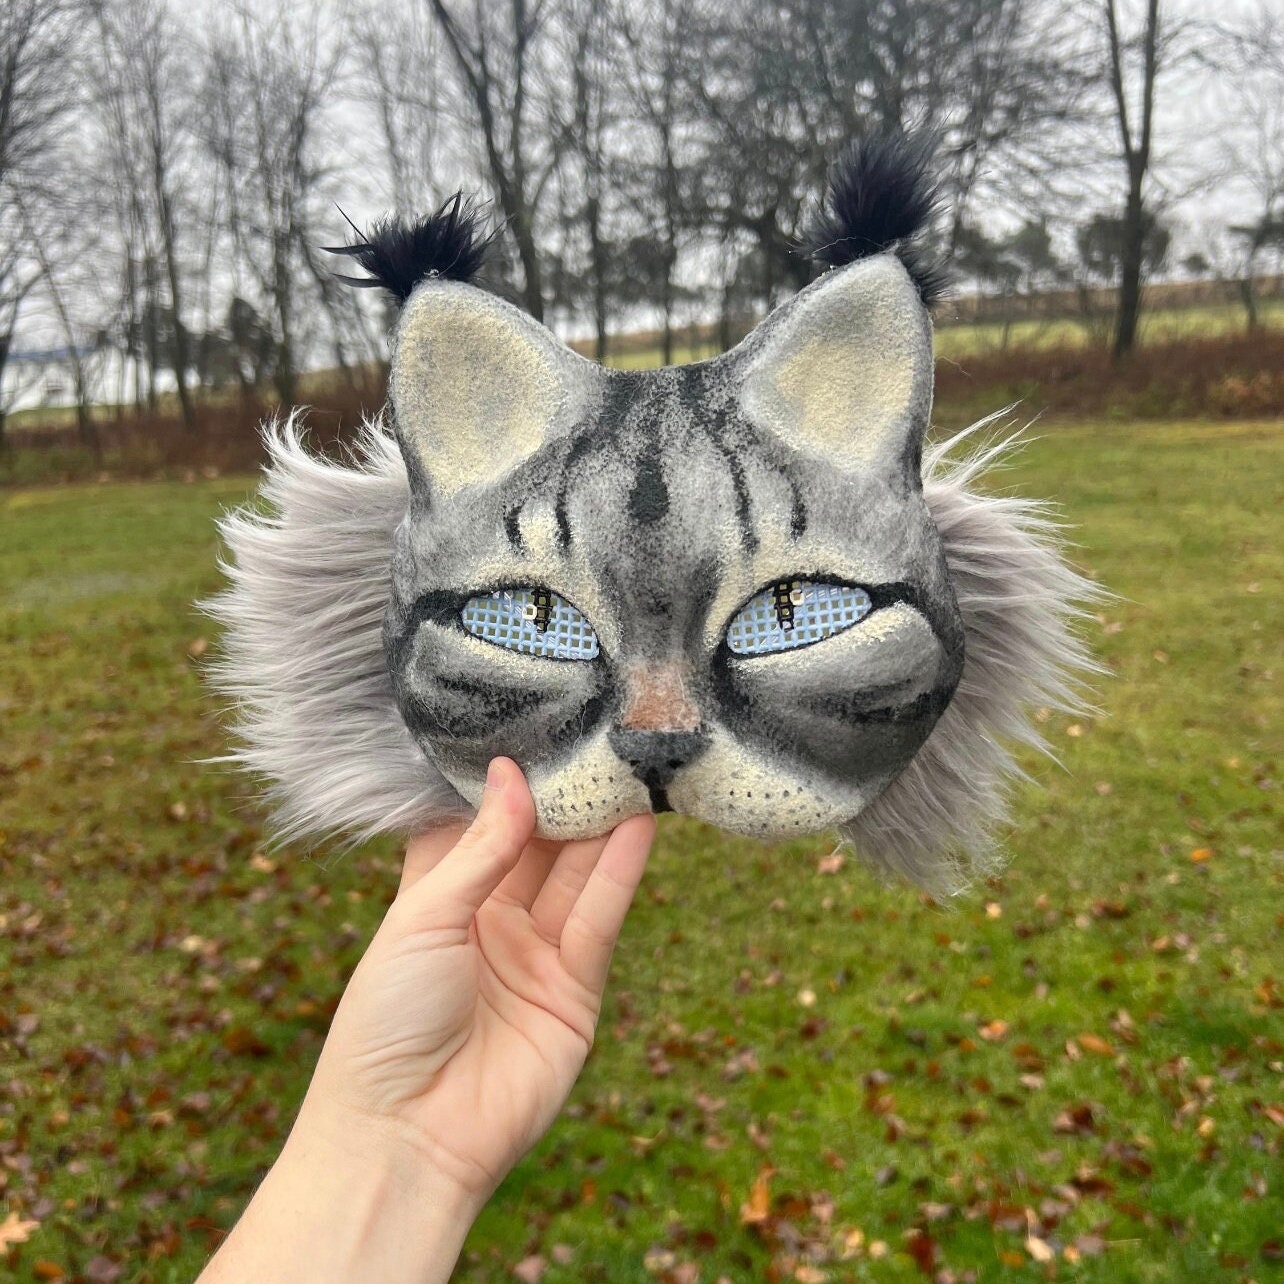 Therian Pink Cat Mask . Therian Gear. Cosplay Cat Mask . Fursuit Mask .  High Quality Therian Mask. - Therian mask - shop - magdalinen